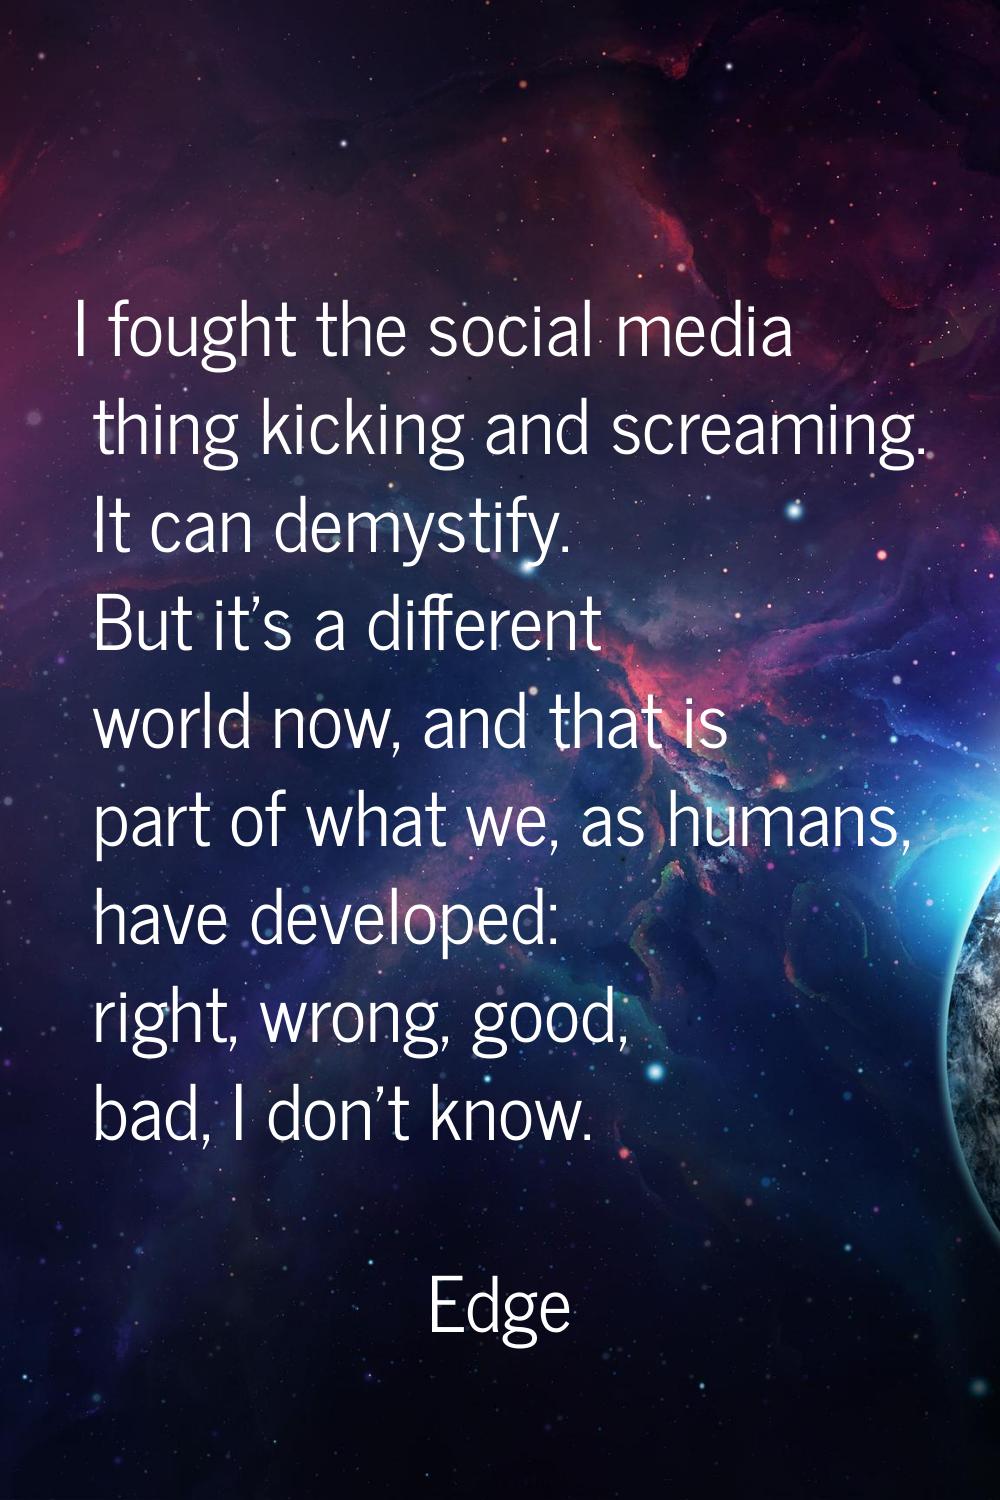 I fought the social media thing kicking and screaming. It can demystify. But it's a different world